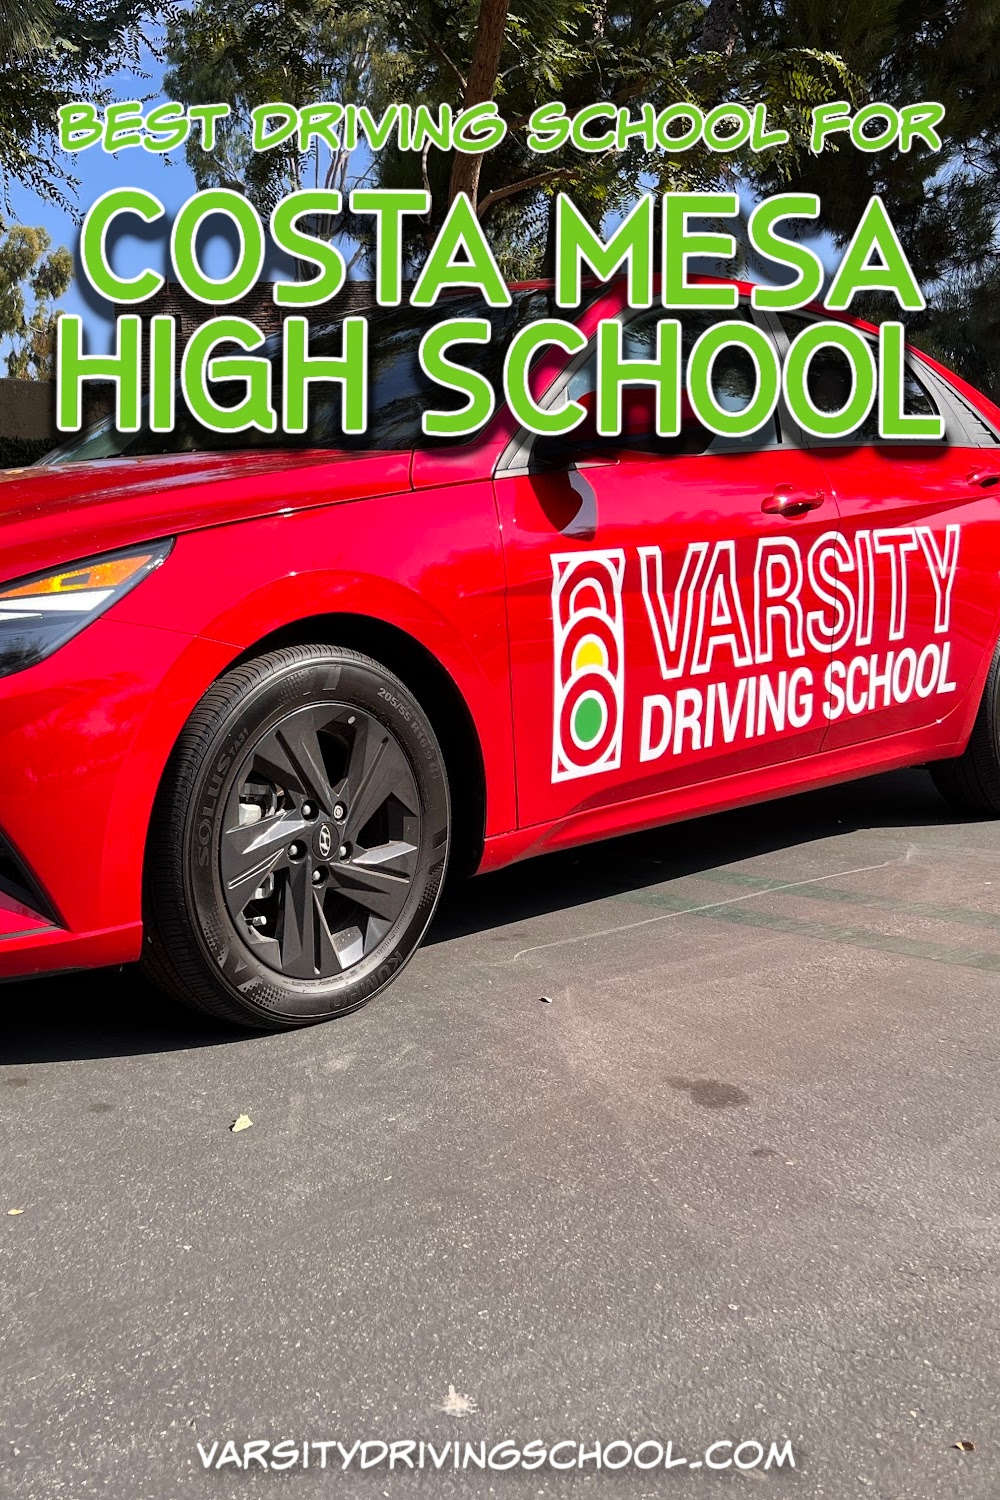 The best Costa Mesa High School driving school is Varsity Driving School, where students learn defensive driving tactics.